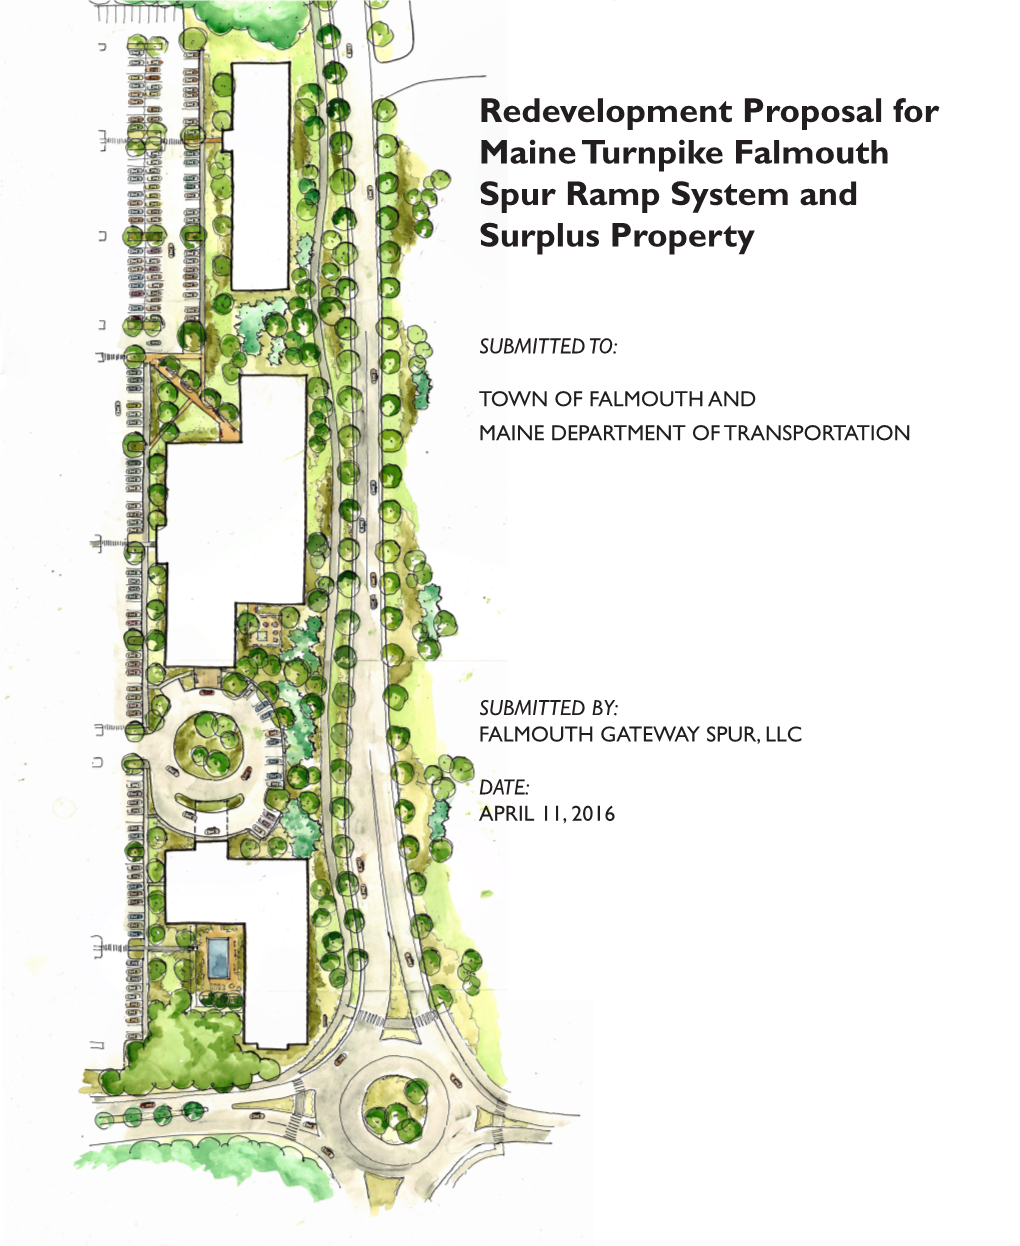 Redevelopment Proposal for Maine Turnpike Falmouth Spur Ramp System and Surplus Property